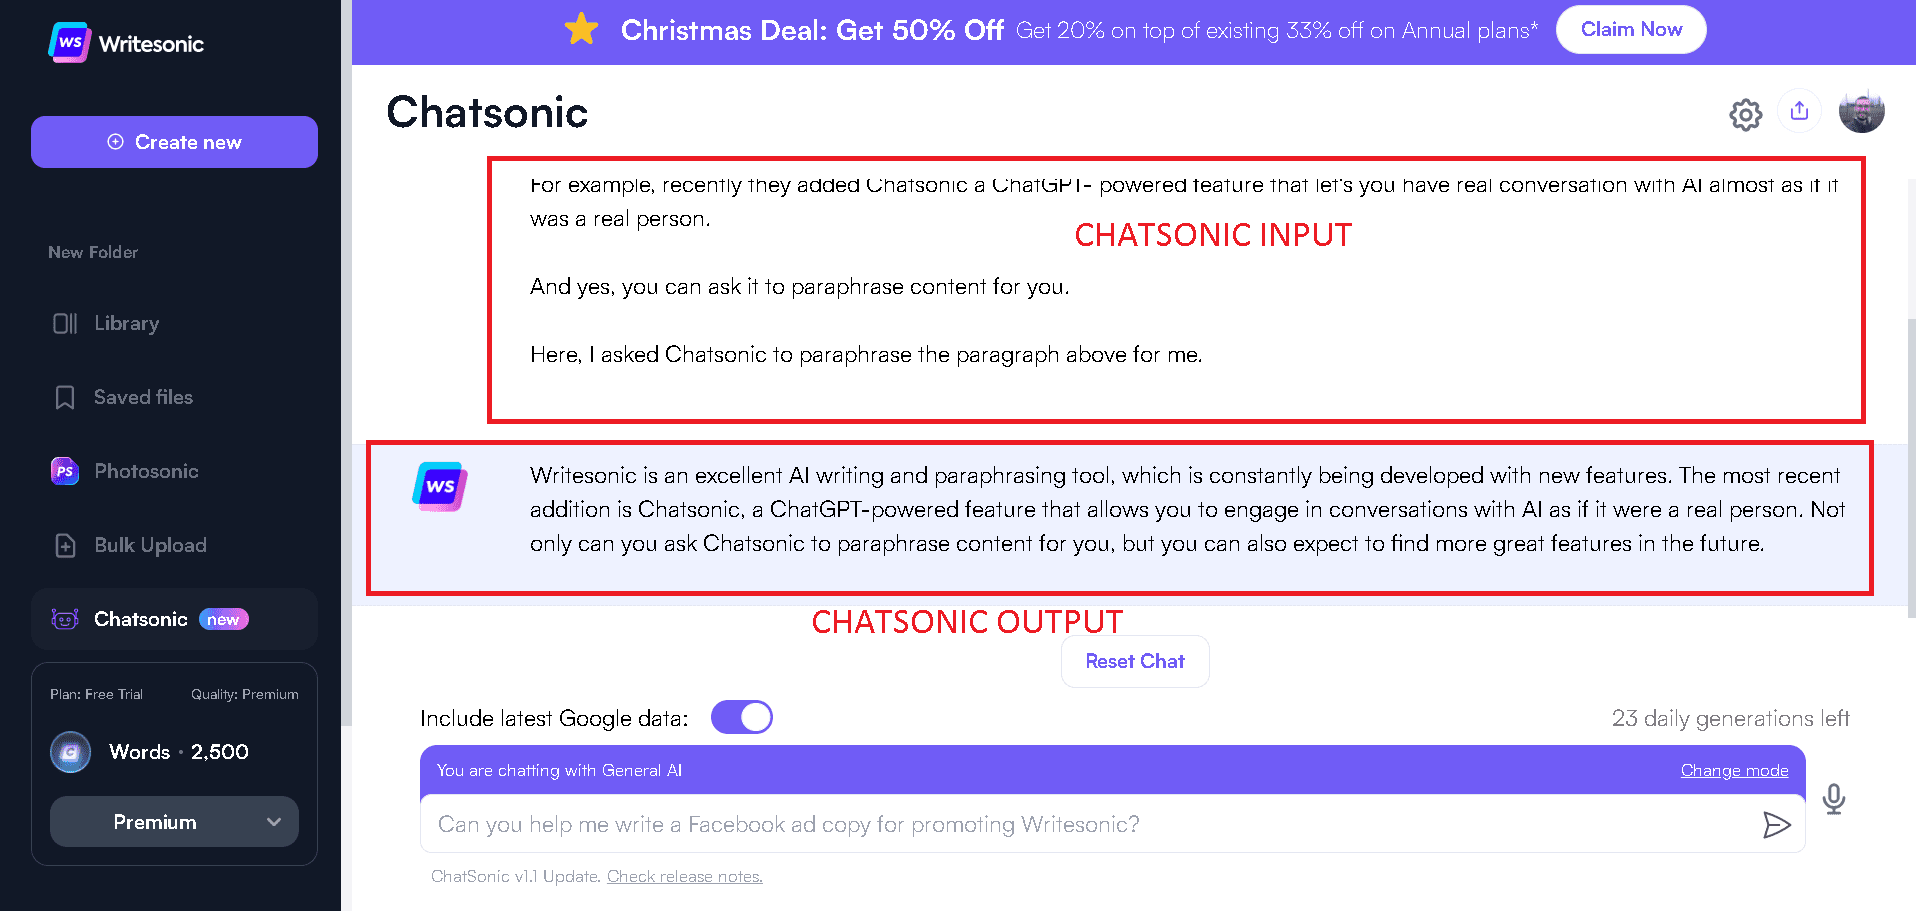 Writesonic Chatsonic feature can paraphrase anything you feed into it